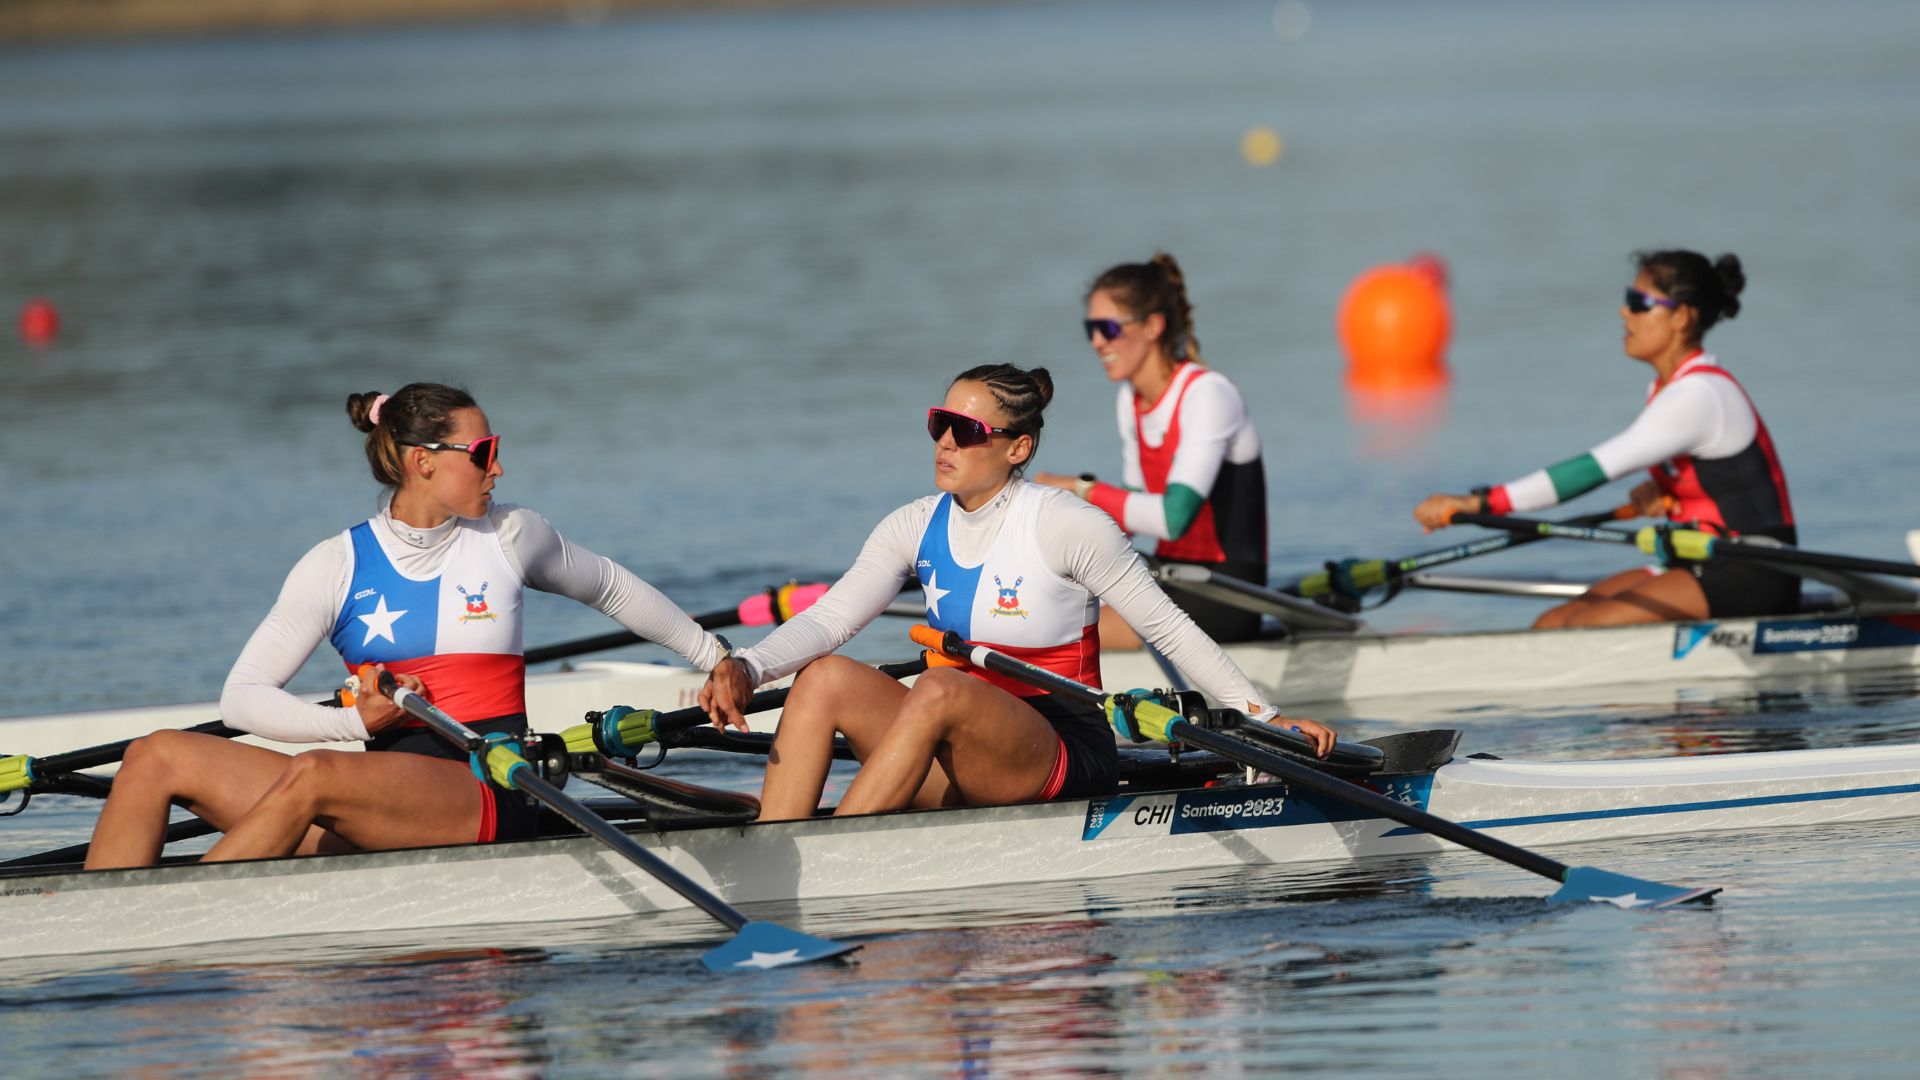 Abraham Sisters Meet Local Audience Expectations in Rowing